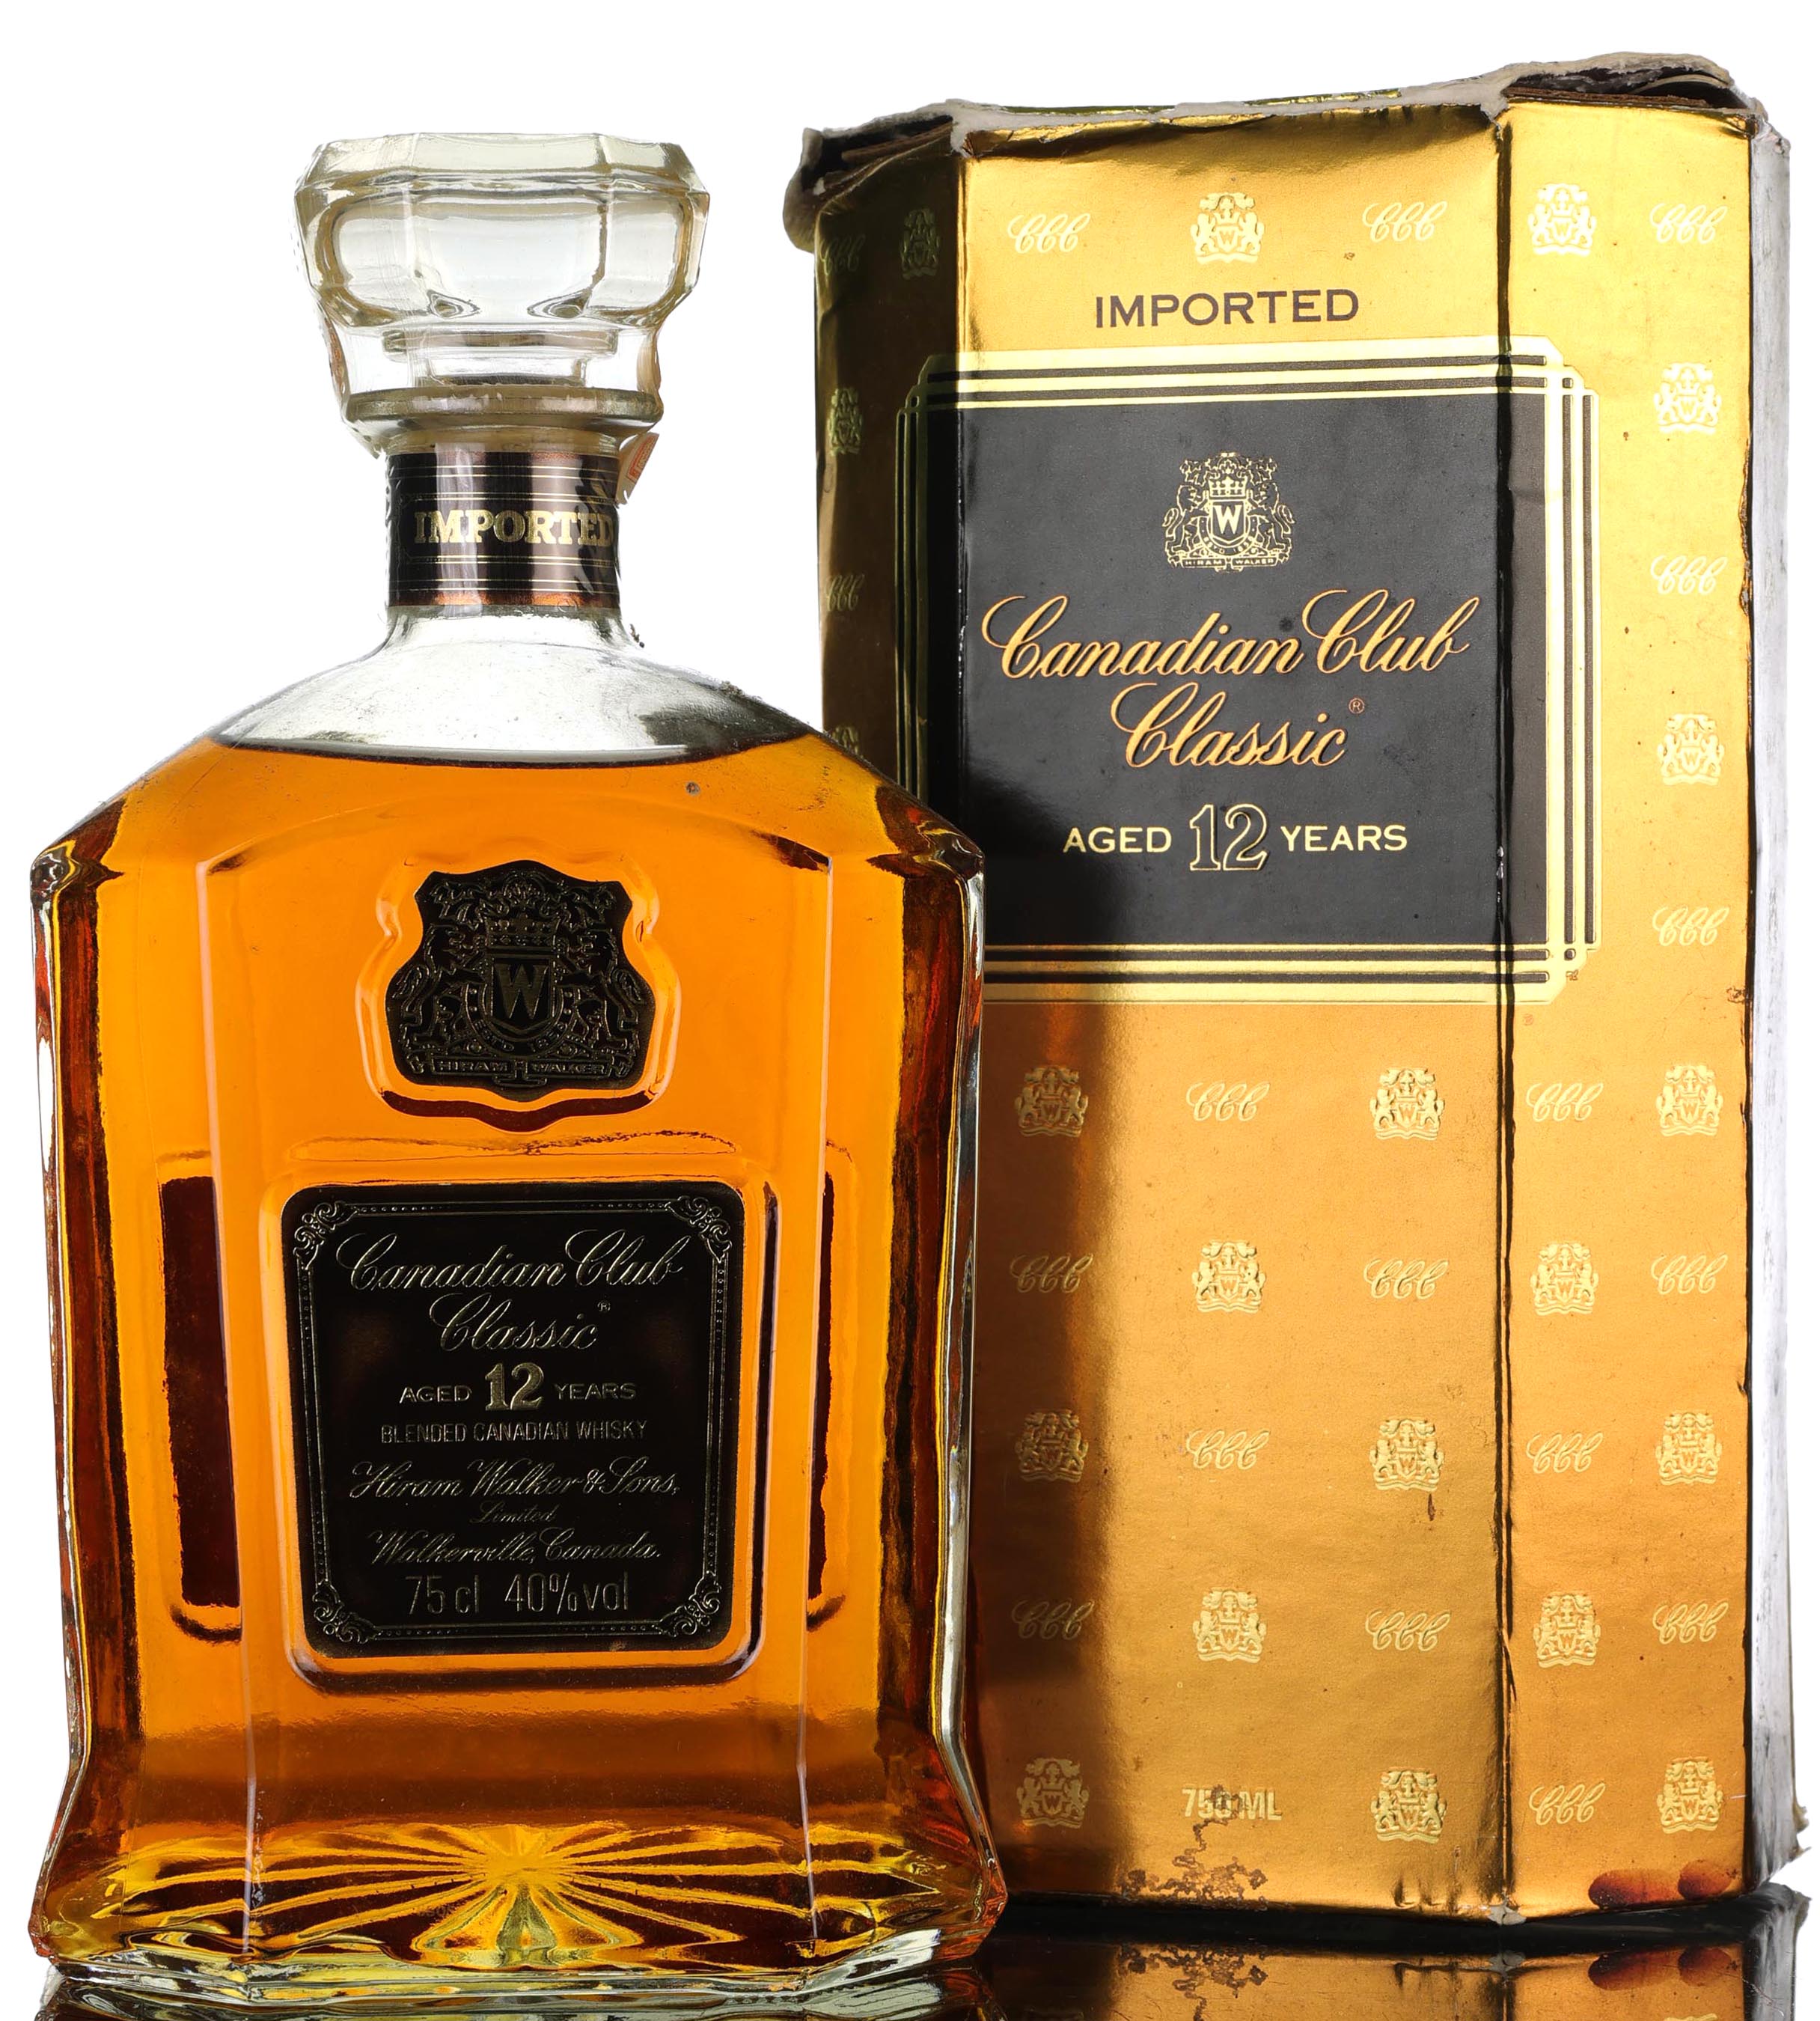 Canadian Club 12 Year Old - Canadian Whiskey